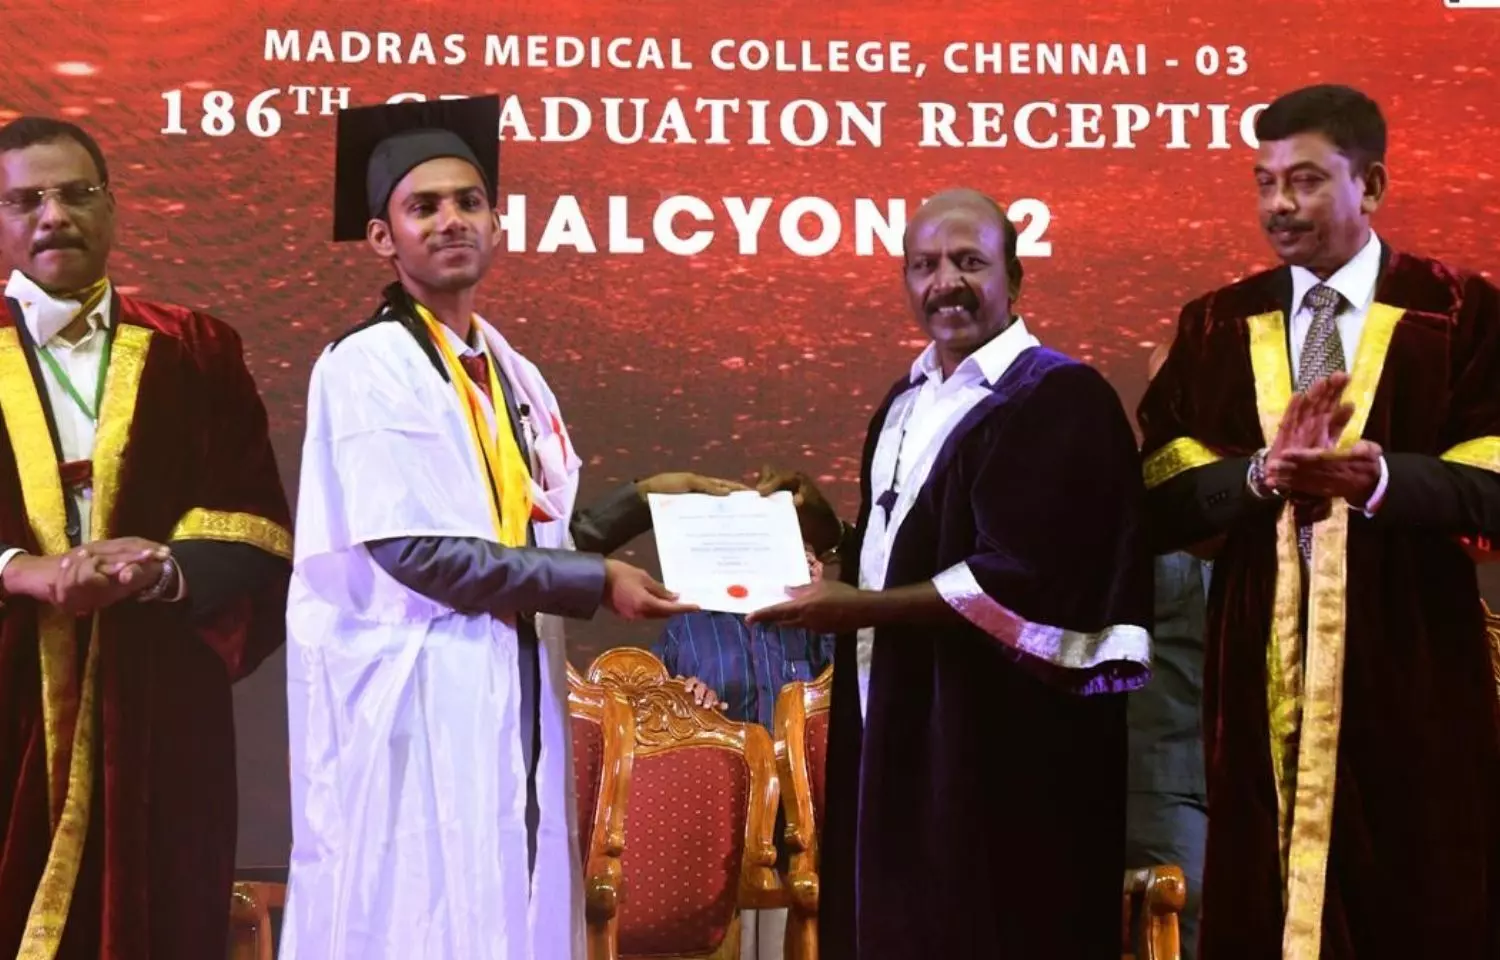 Madras Medical College student bags 36 medals in MBBS degree